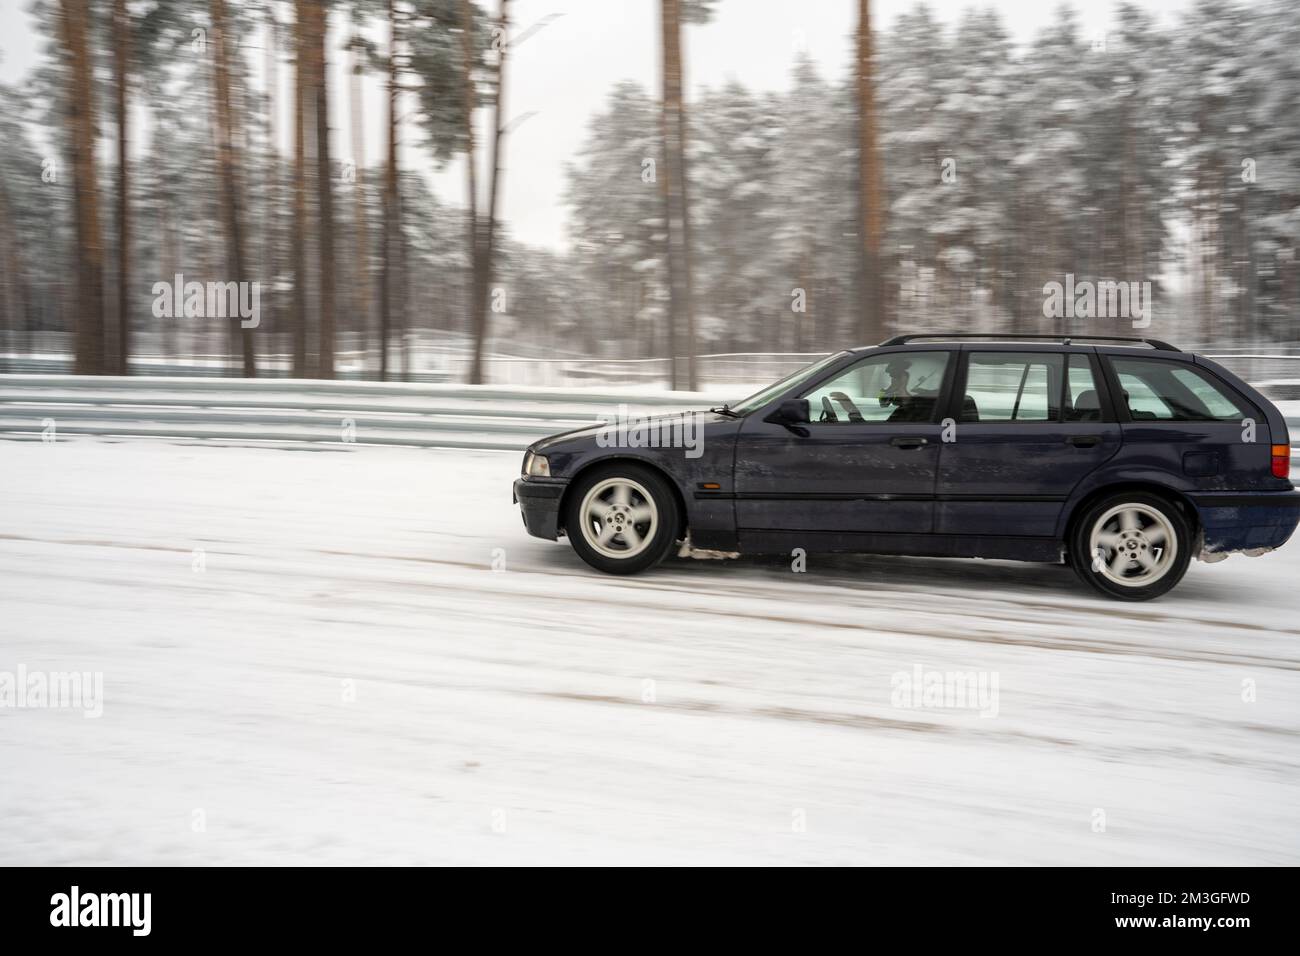 12-12-2022 Riga, Latvia  a black car driving down a snowy road next to a forest of trees and snow covered ground with no one in it. . Stock Photo